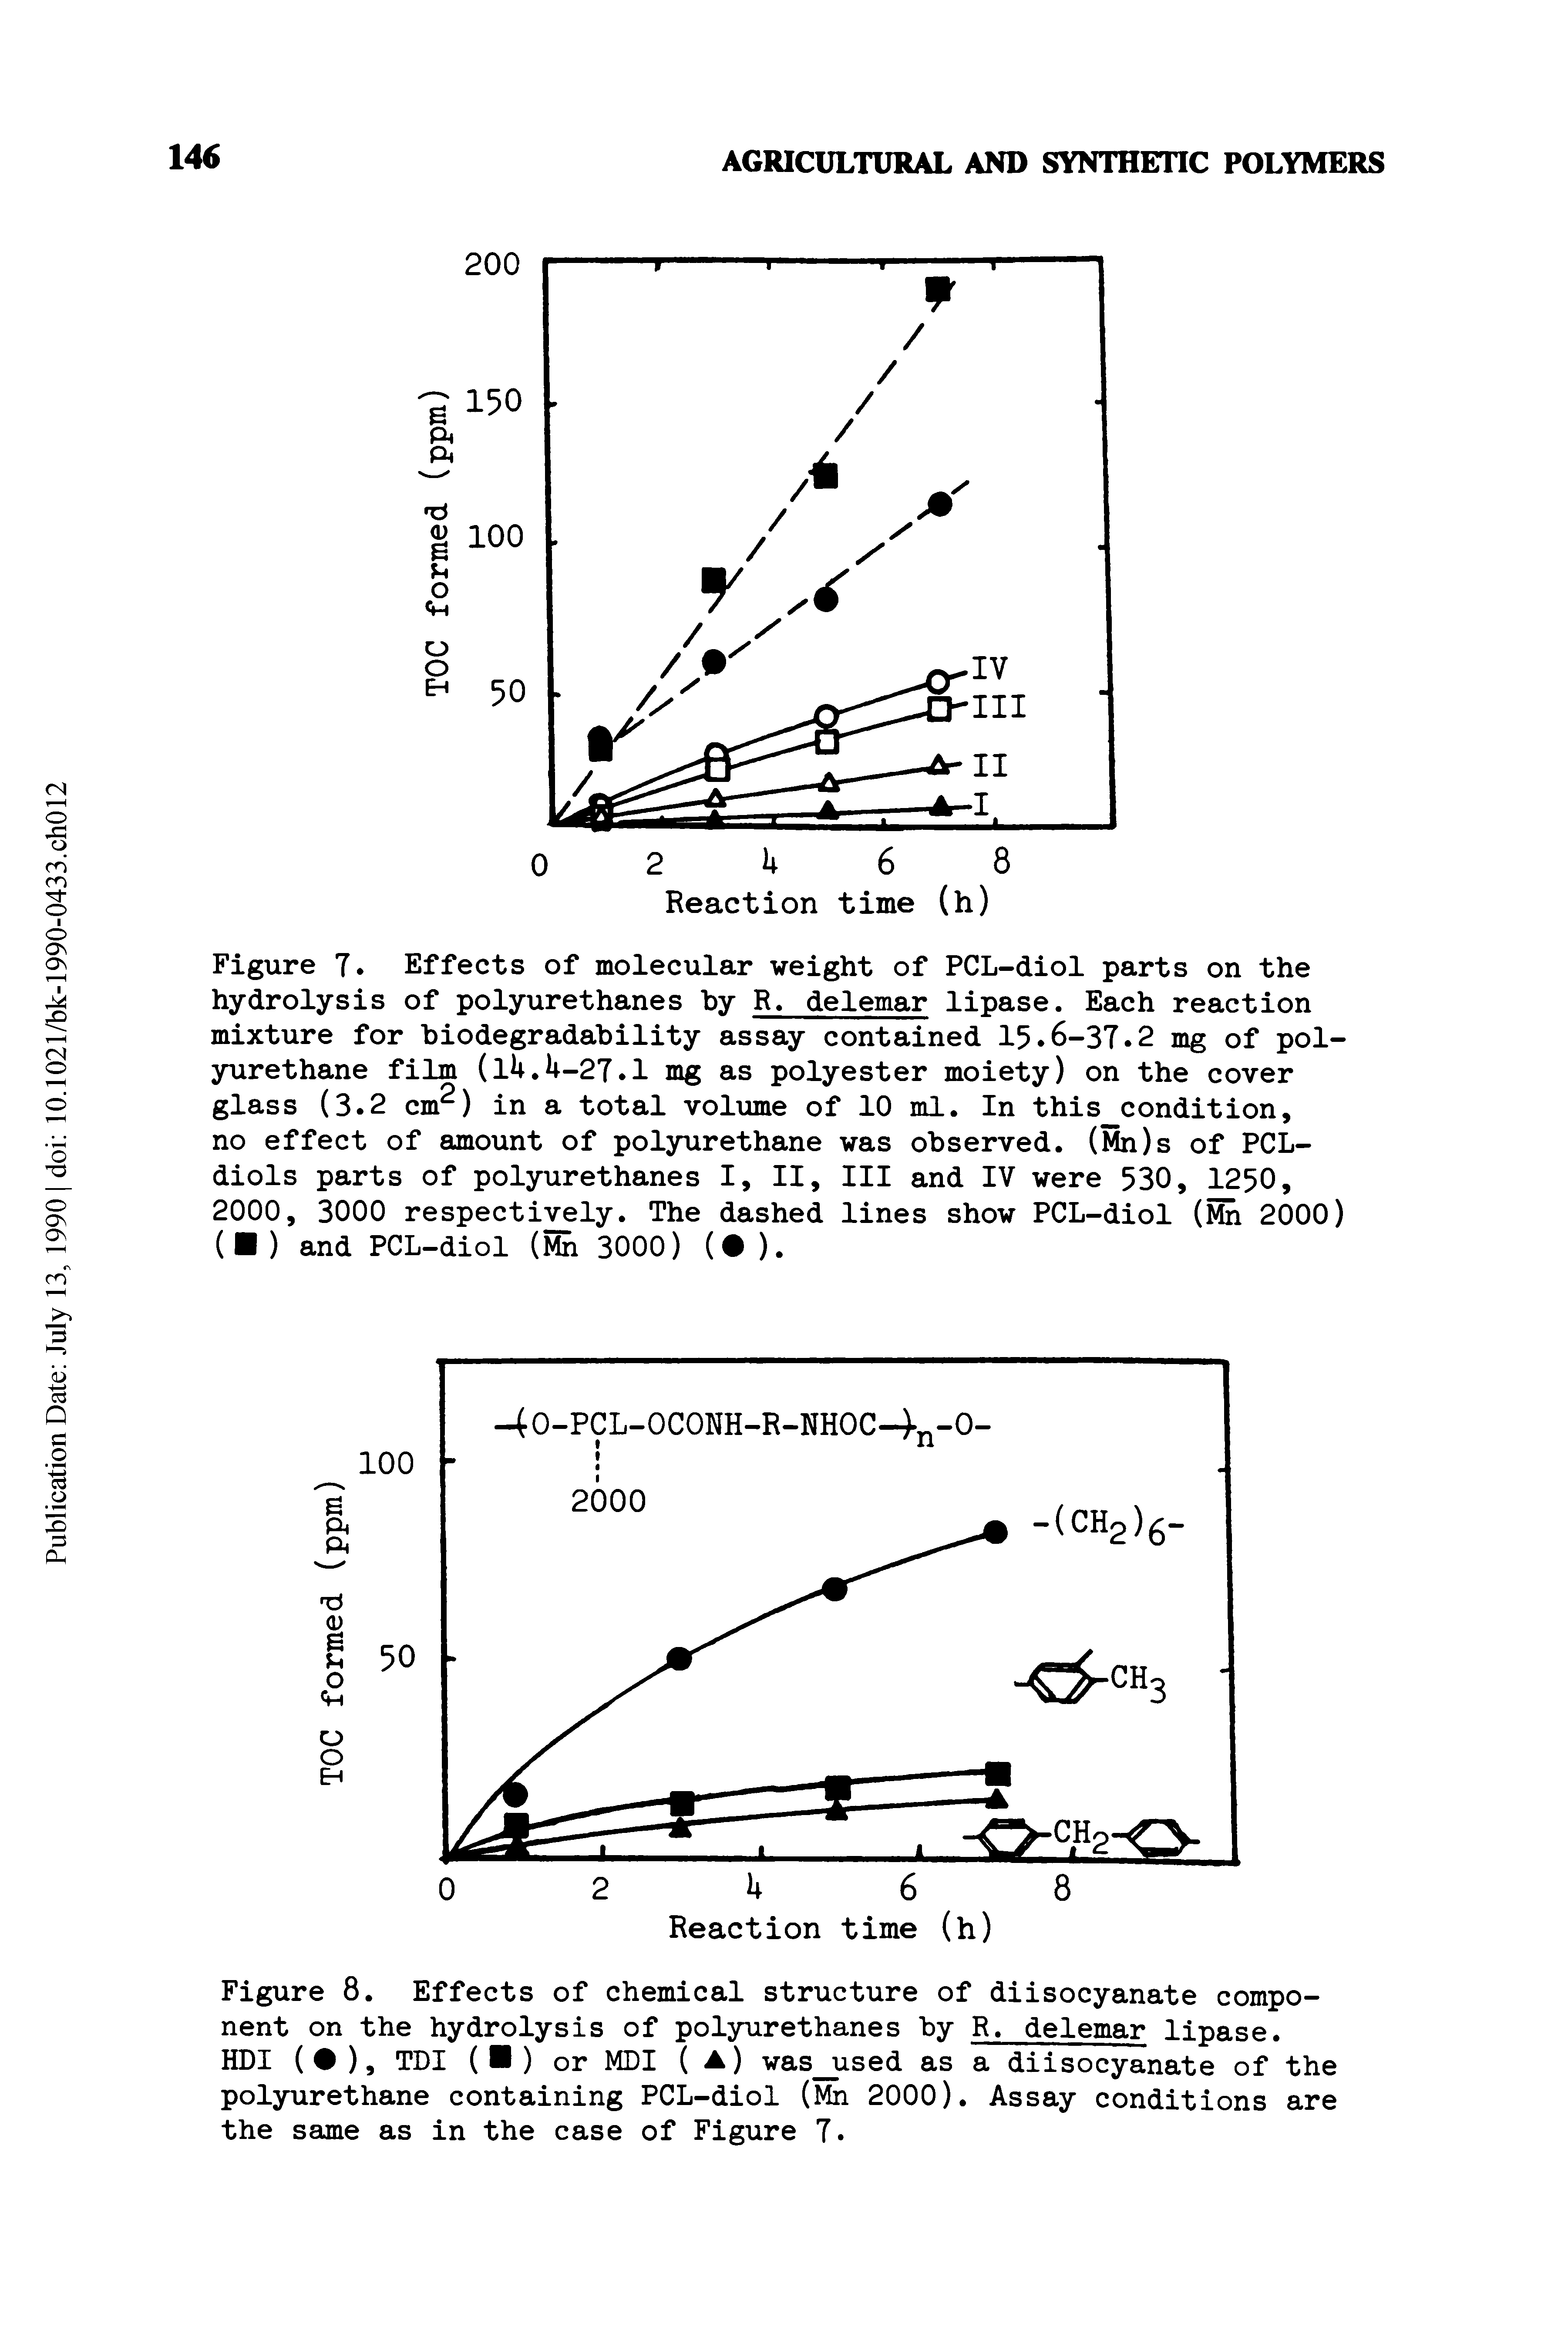 Figure T. Effects of molecular weight of PCL-diol parts on the hydrolysis of polyurethanes by R. delemar lipase. Each reaction mixture for biodegradability assay contained 15.6-37.2 mg of polyurethane film (i4.U-2T.1 mg as polyester moiety) on the cover glass (3.2 cm ) in a total volume of 10 ml. In this condition, no effect of amount of polyurethane was observed. (Mn)s of PCL-diols parts of polyurethanes I, II, III and IV were 530, 1250, 2000, 3000 respectively. The dashed lines show PCL-diol (Mn 2000) ( ) and PCL-diol (Mn 3000) ( ).